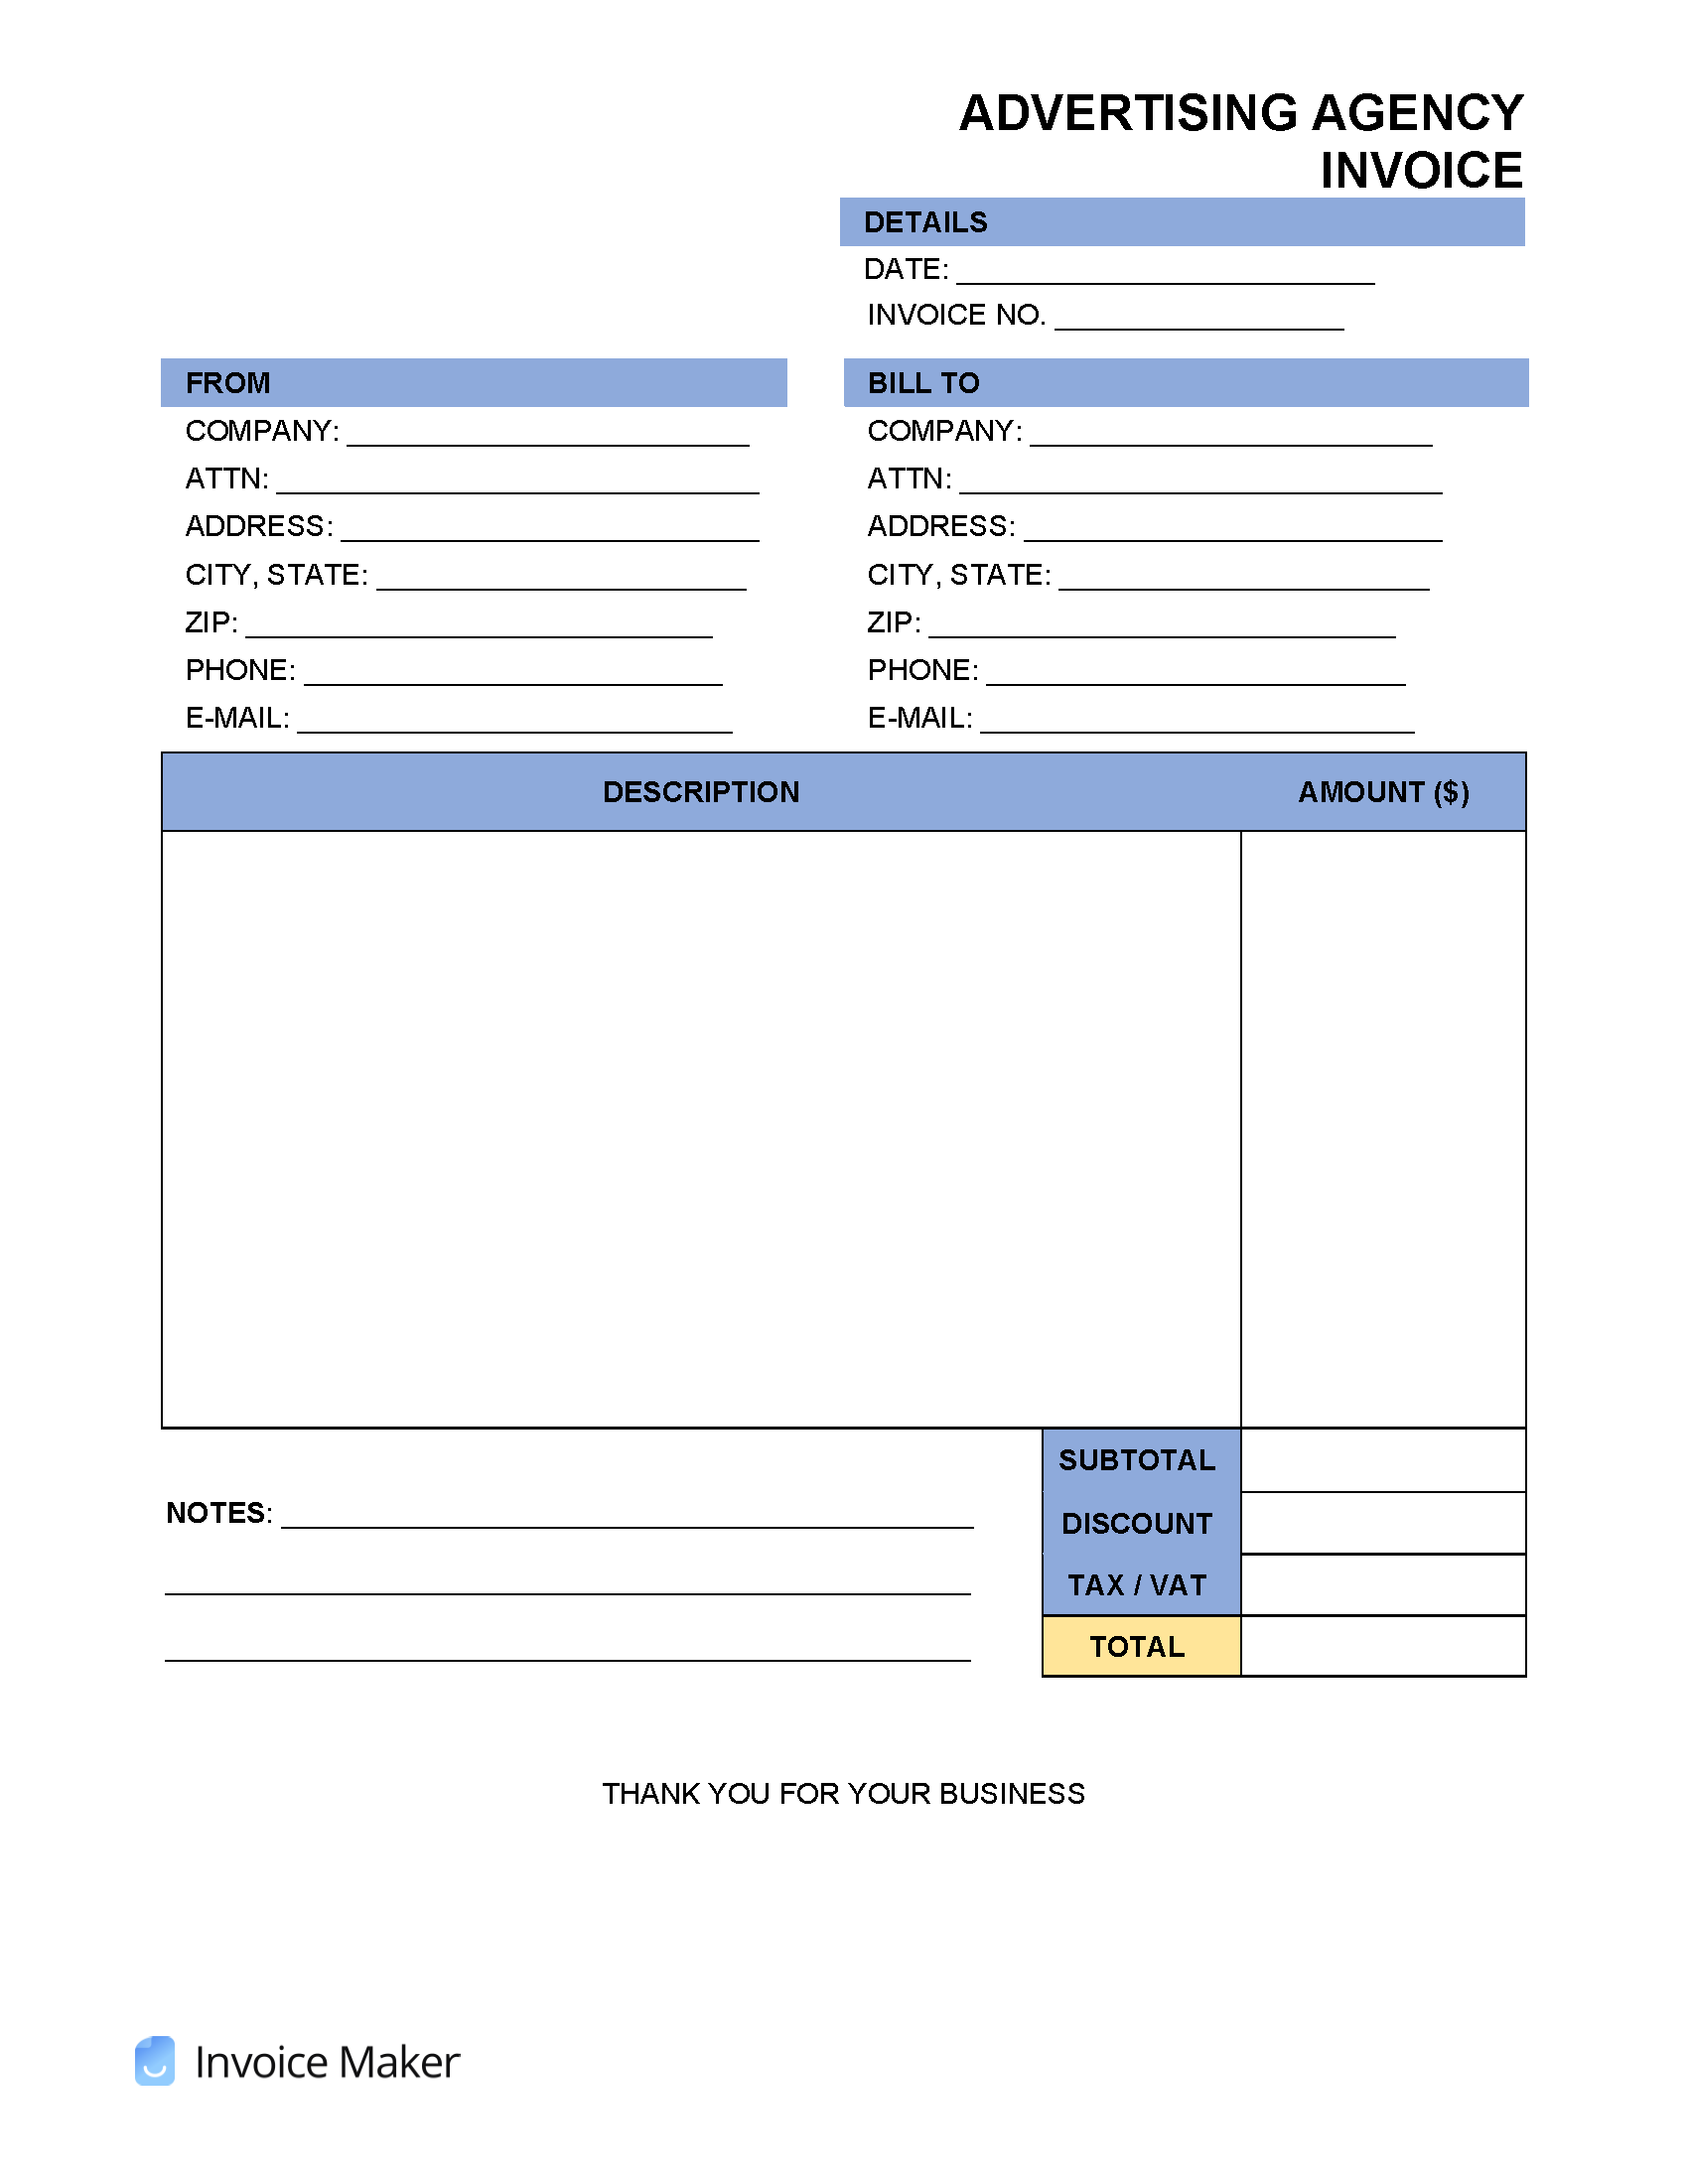 Advertising Agency Invoice Template Invoice Maker 8+ Advertising